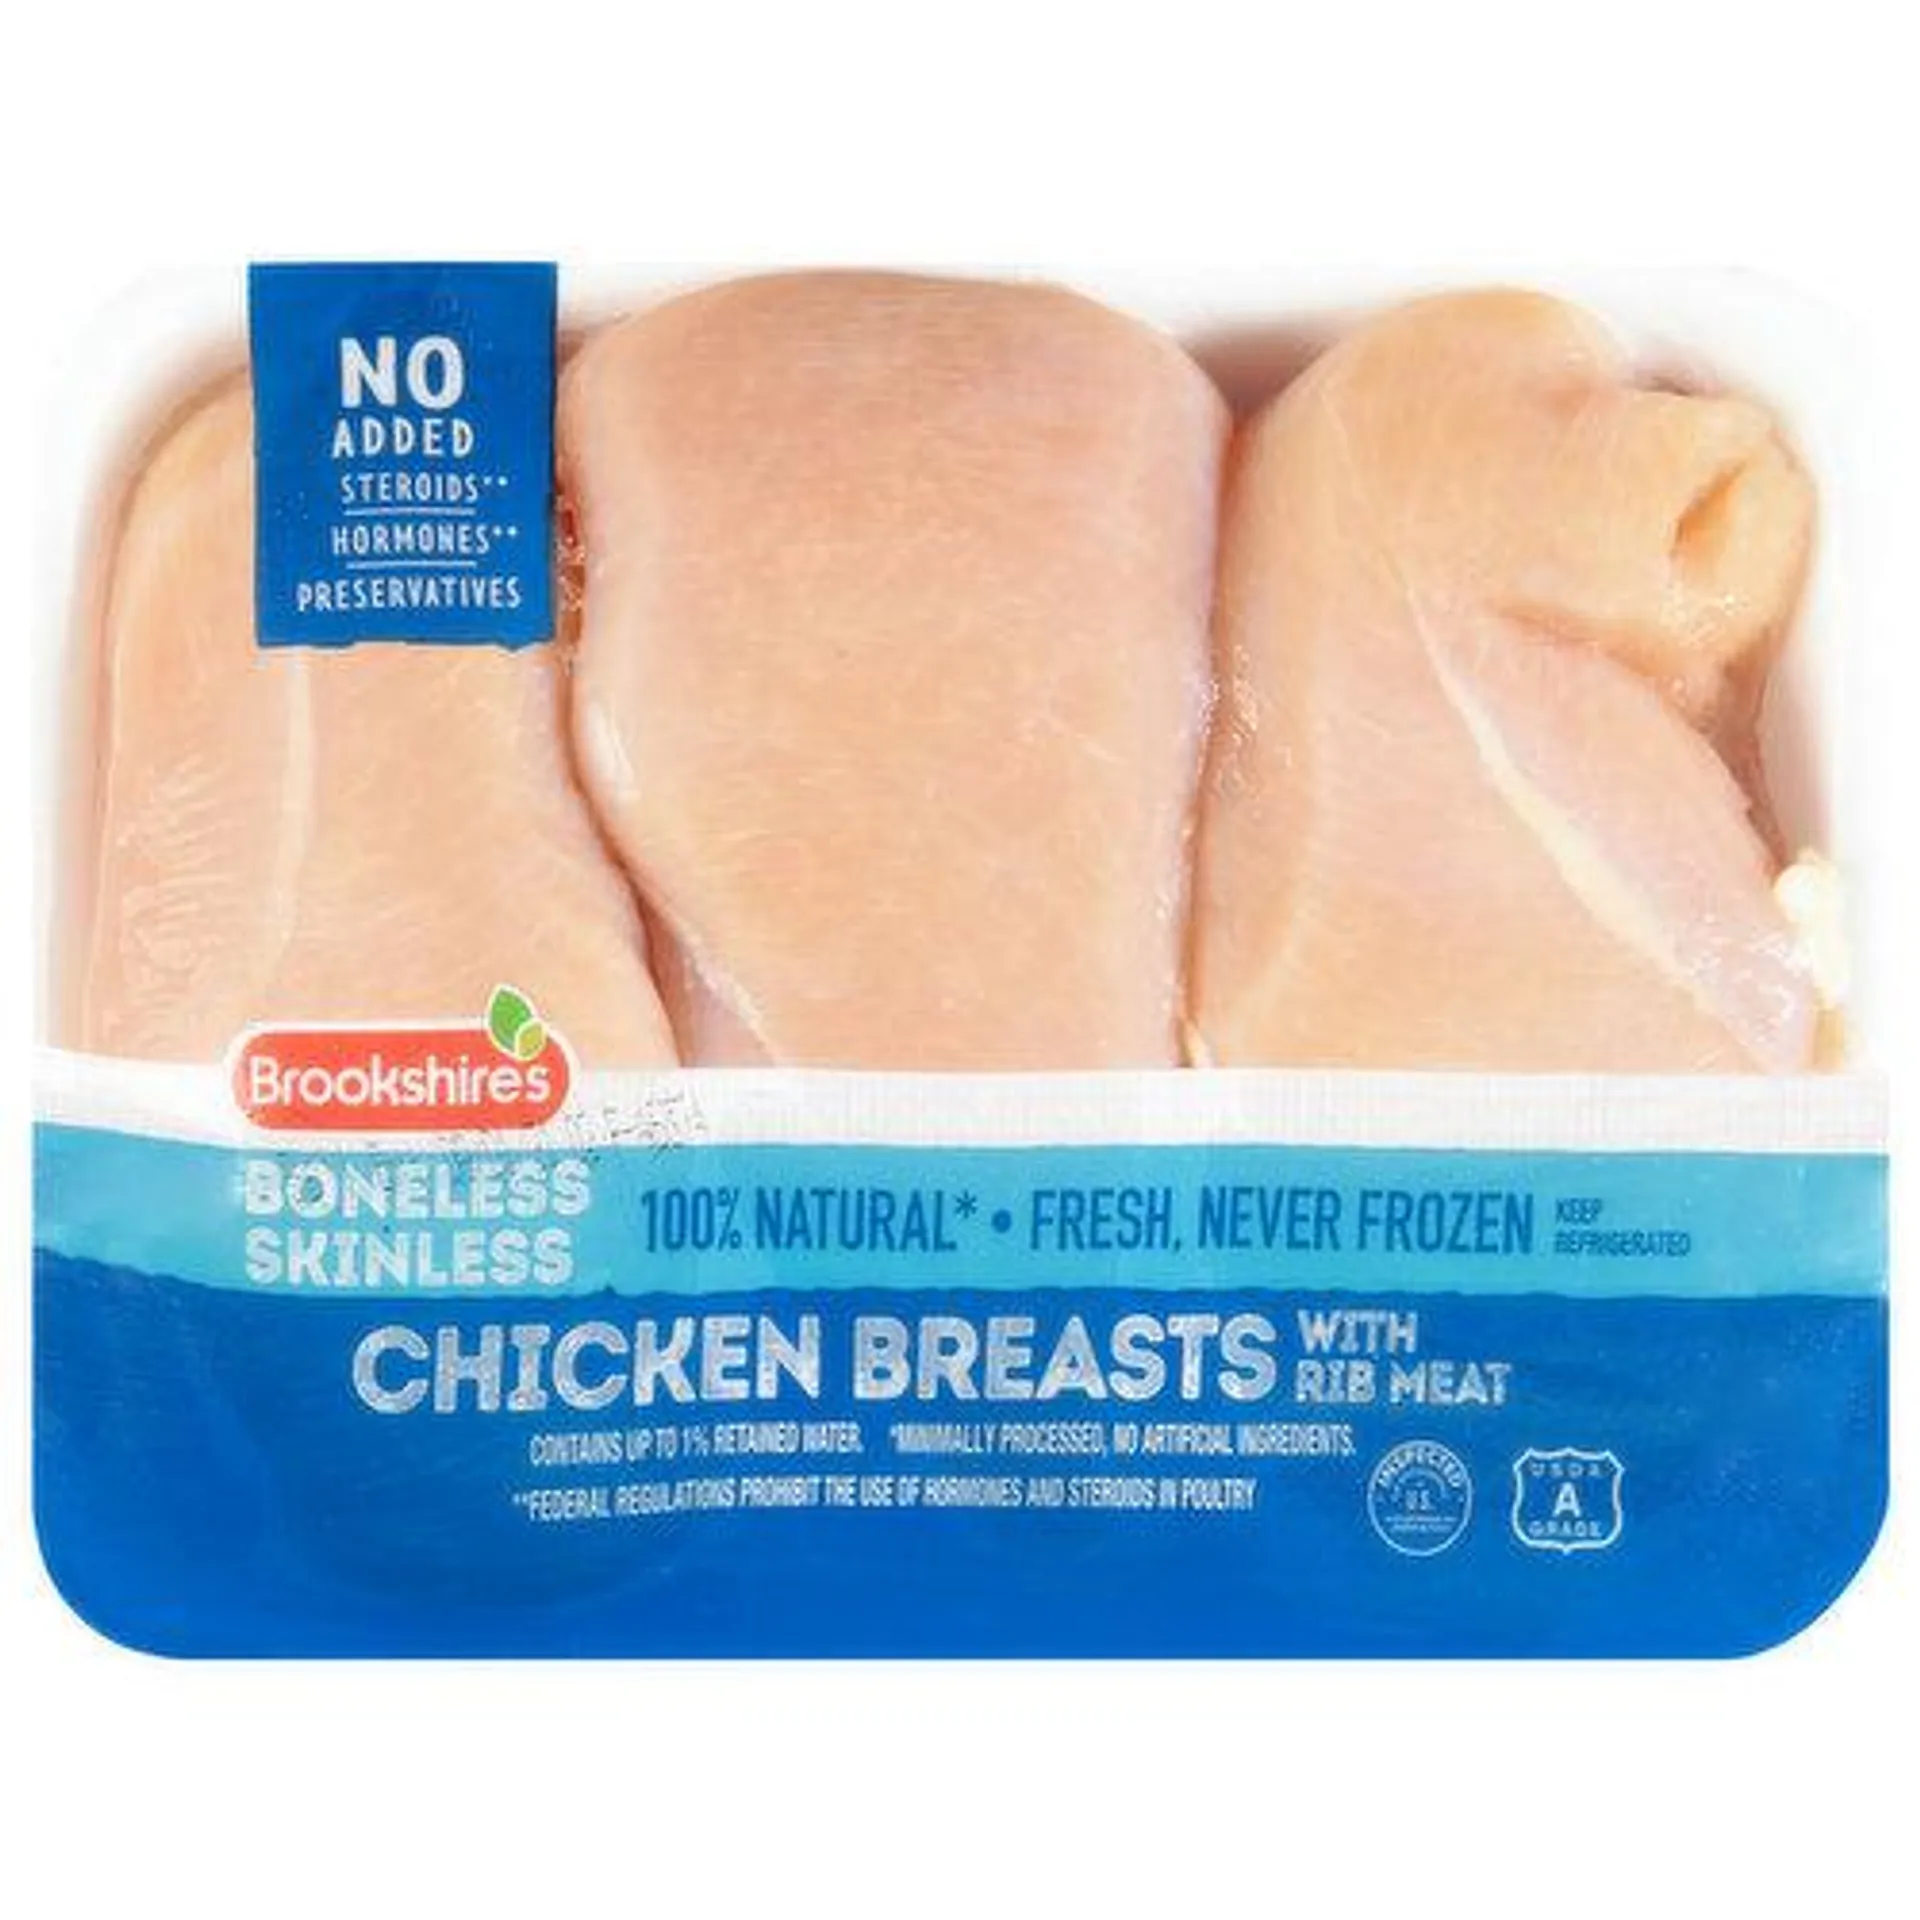 Brookshire's Chicken Breasts with Rib Meat, Boneless, Skinless - 2.36 Pound